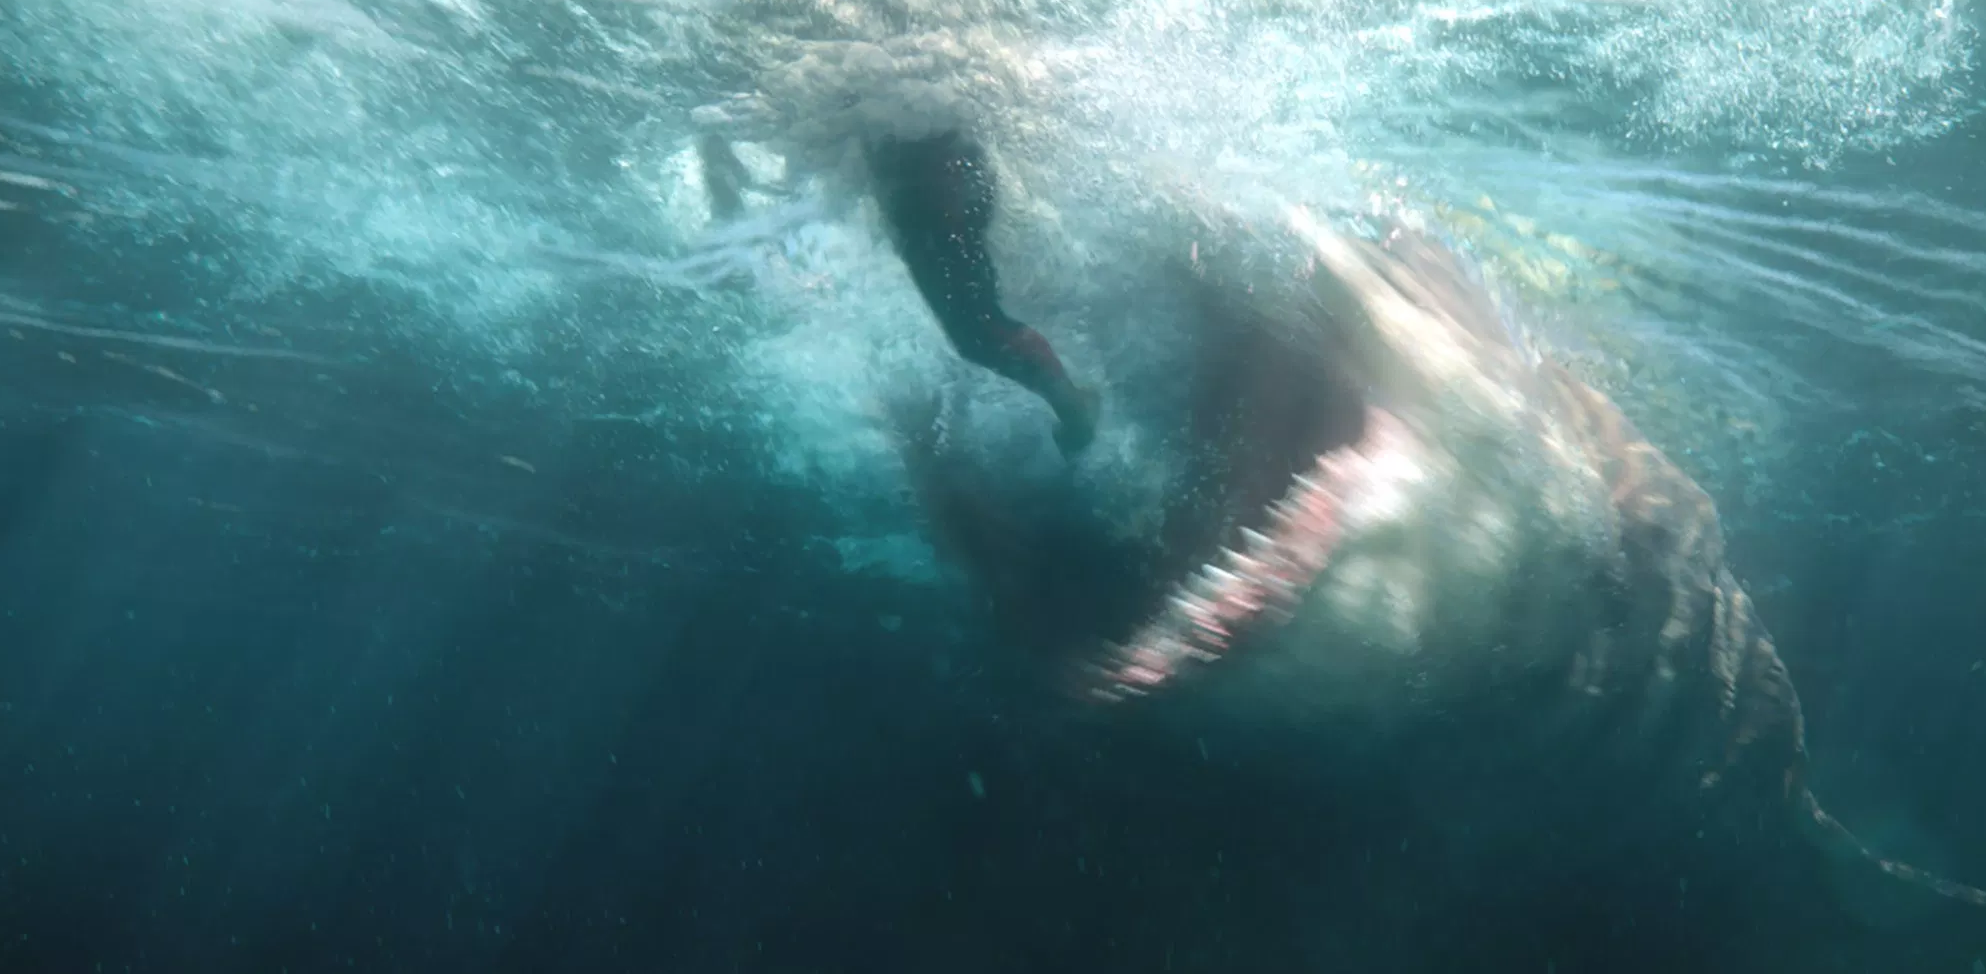 How scary is The Meg?